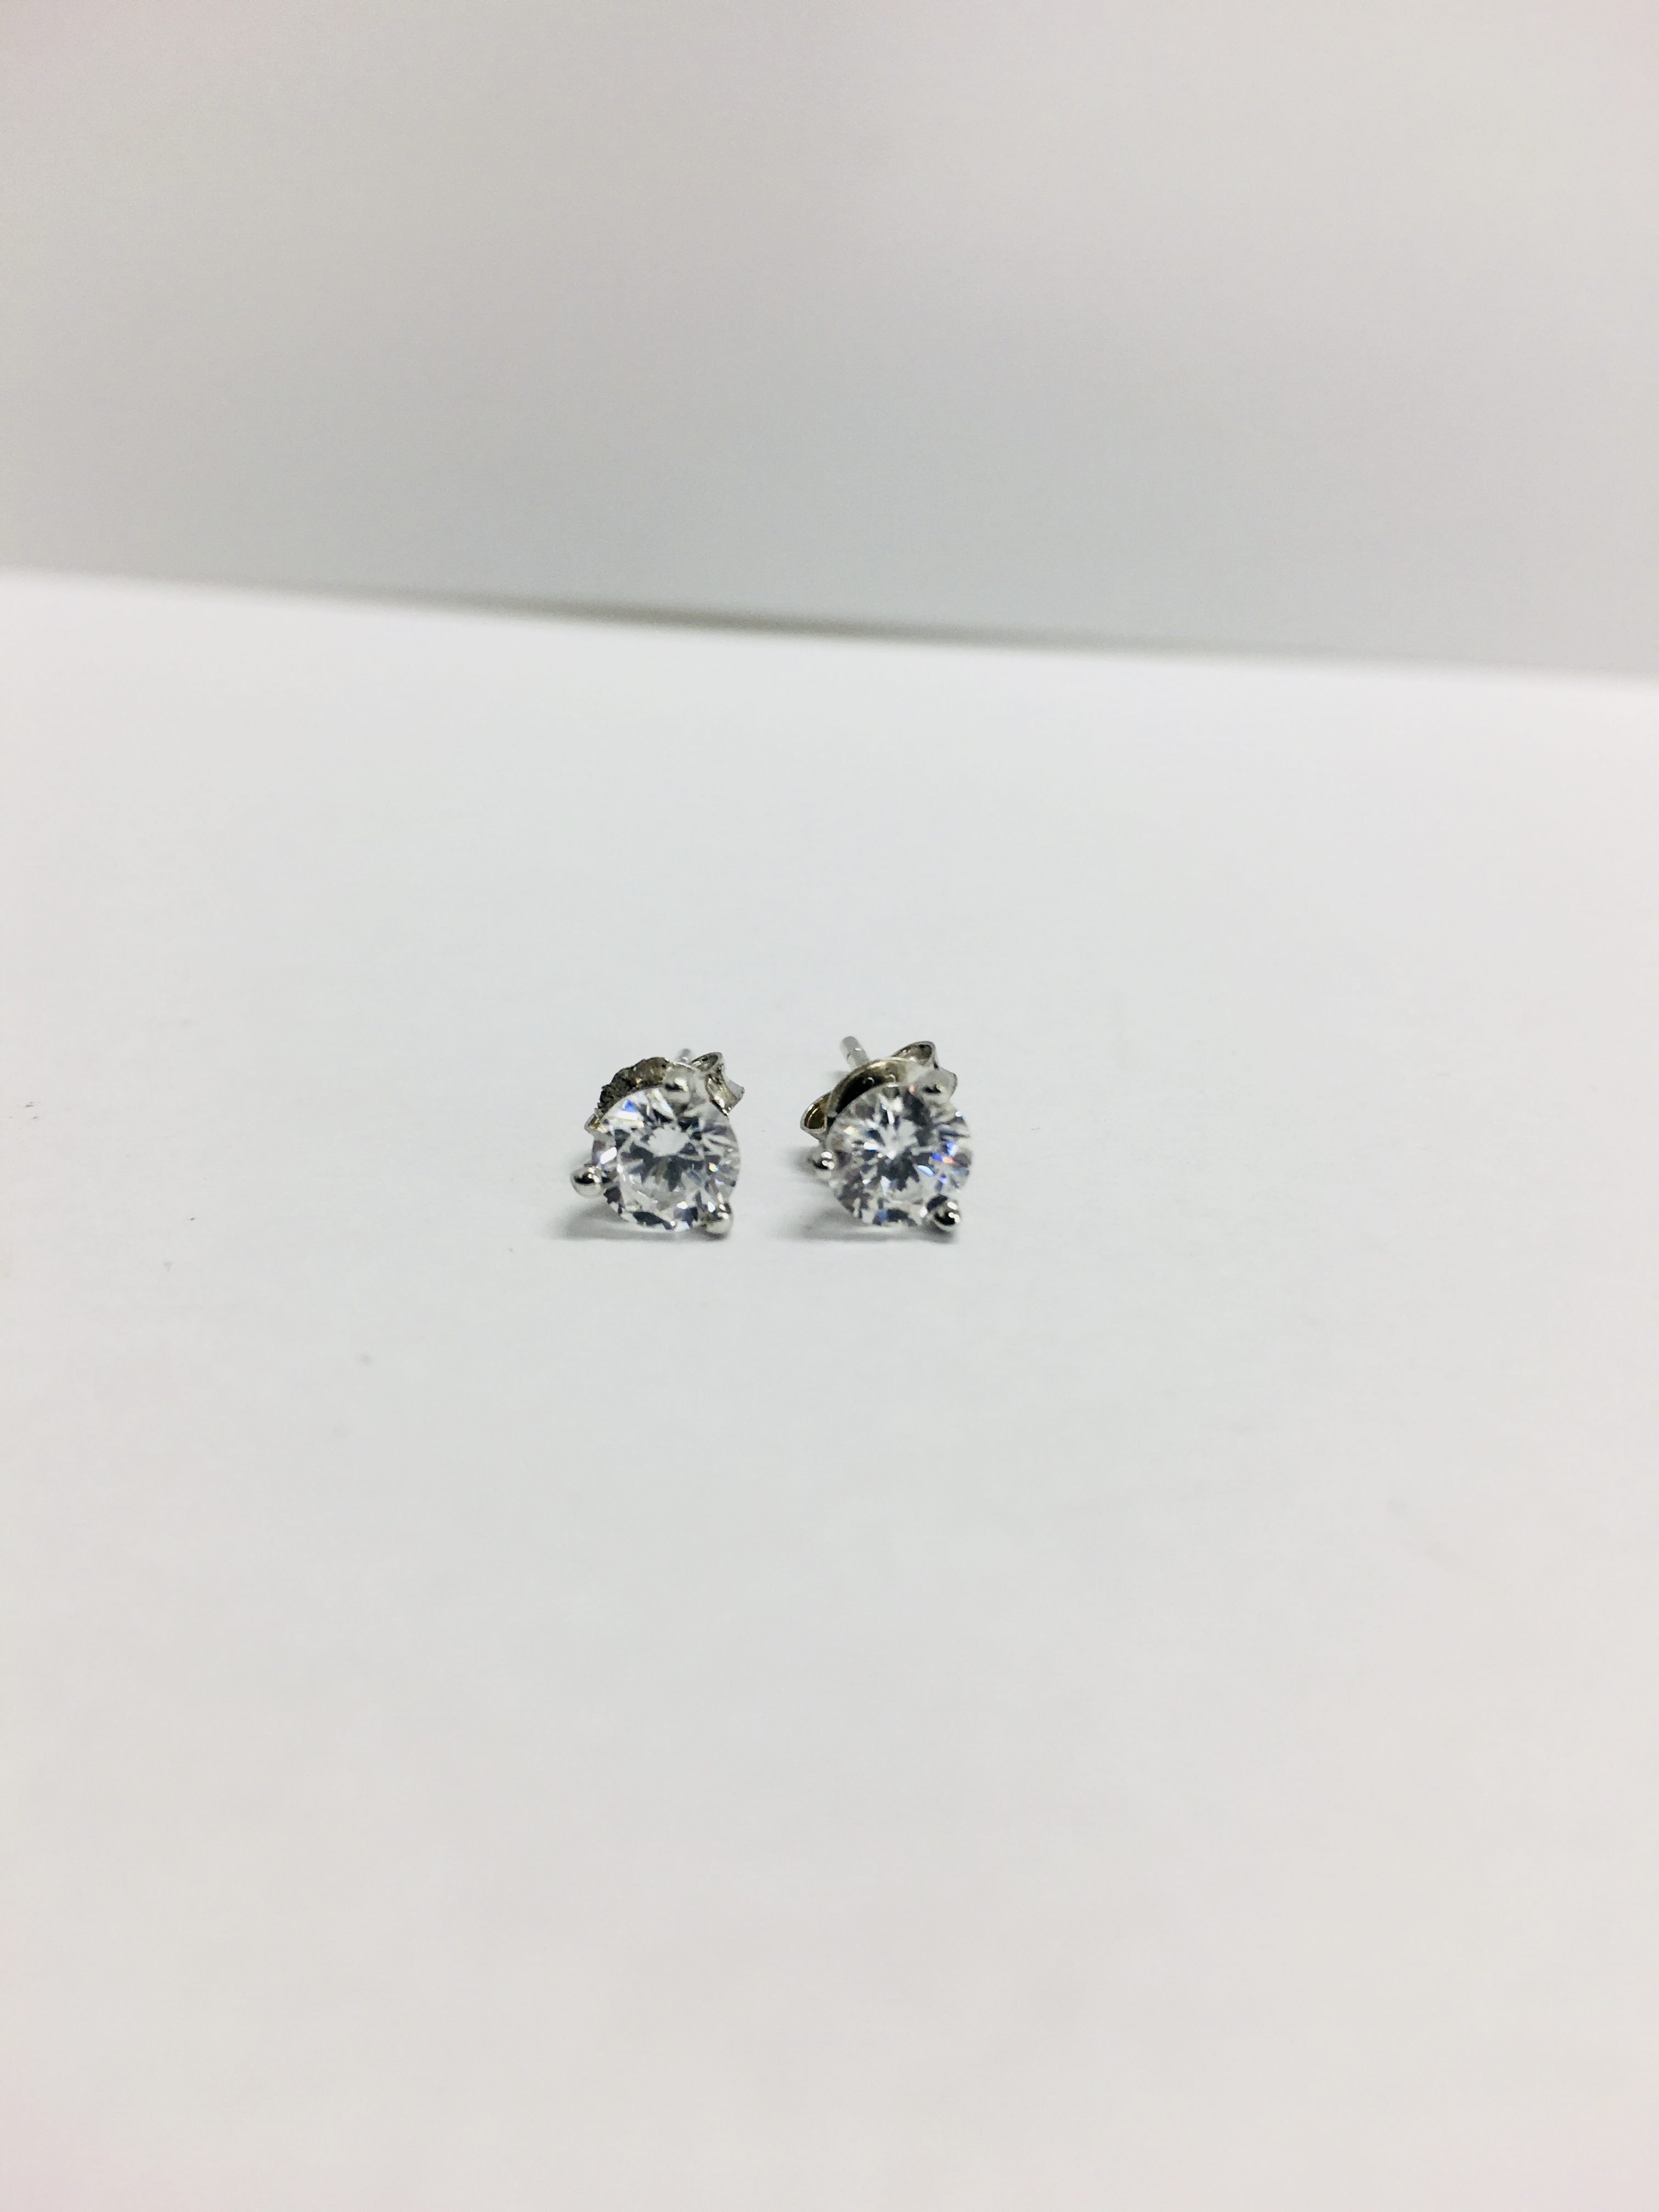 0.70ct diamond solitaire stud earrings set in platinum. I colour, si3 clarity. 3 claw setting with